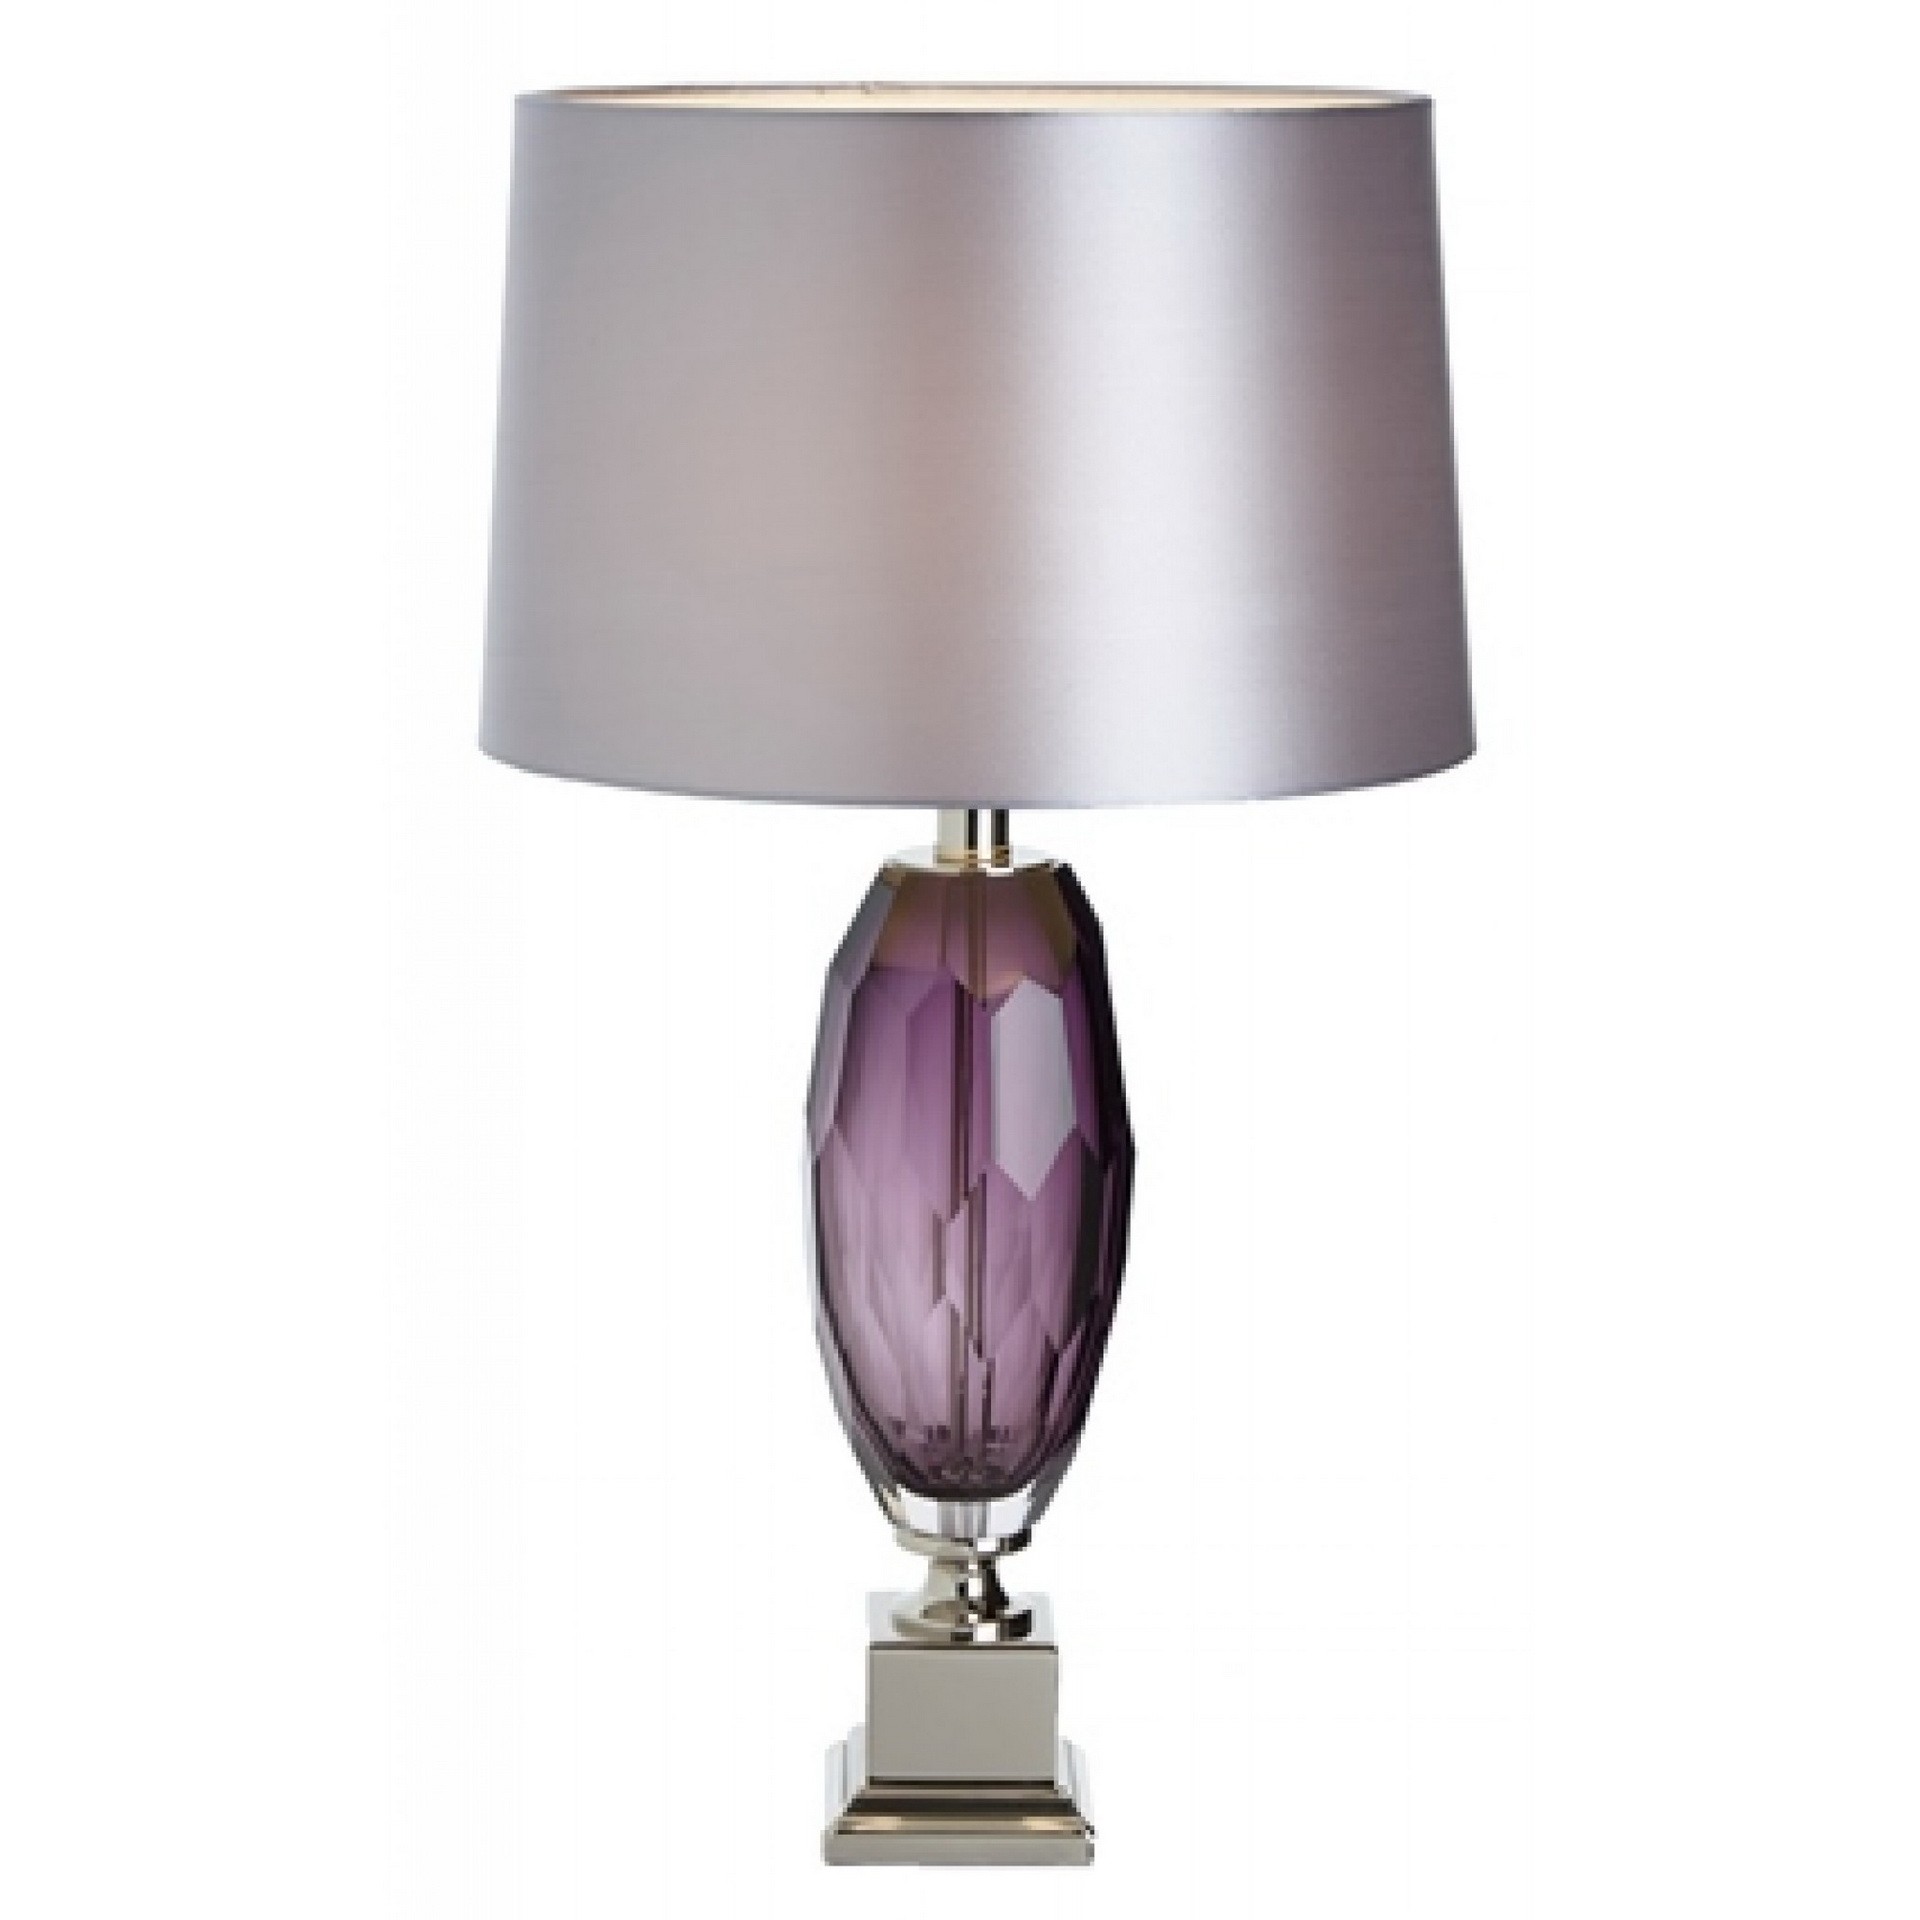 Purple glass table lamp a touch of purple sophistication 3